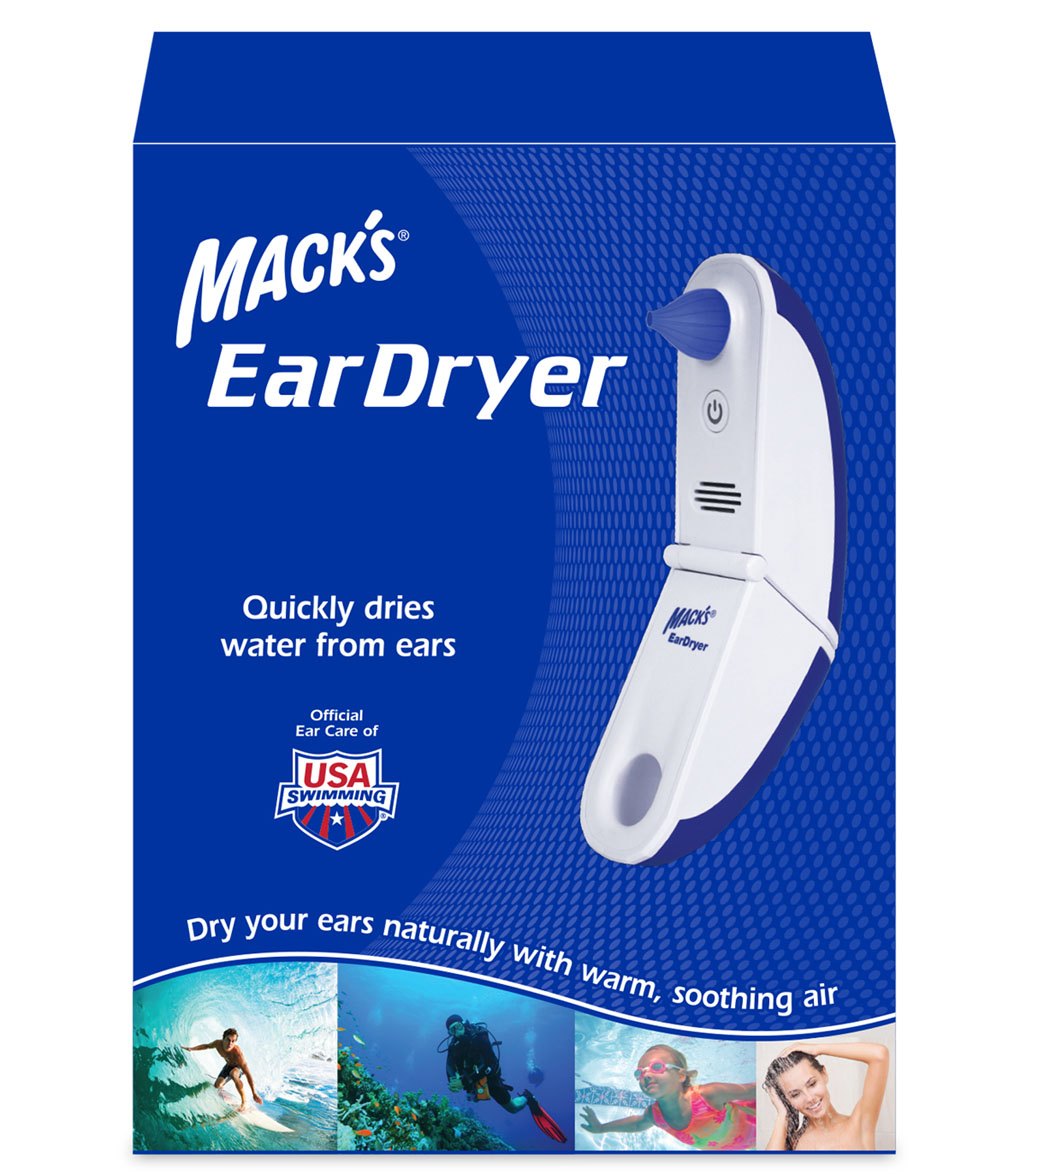 Mack's Electronic Ear Dryer at